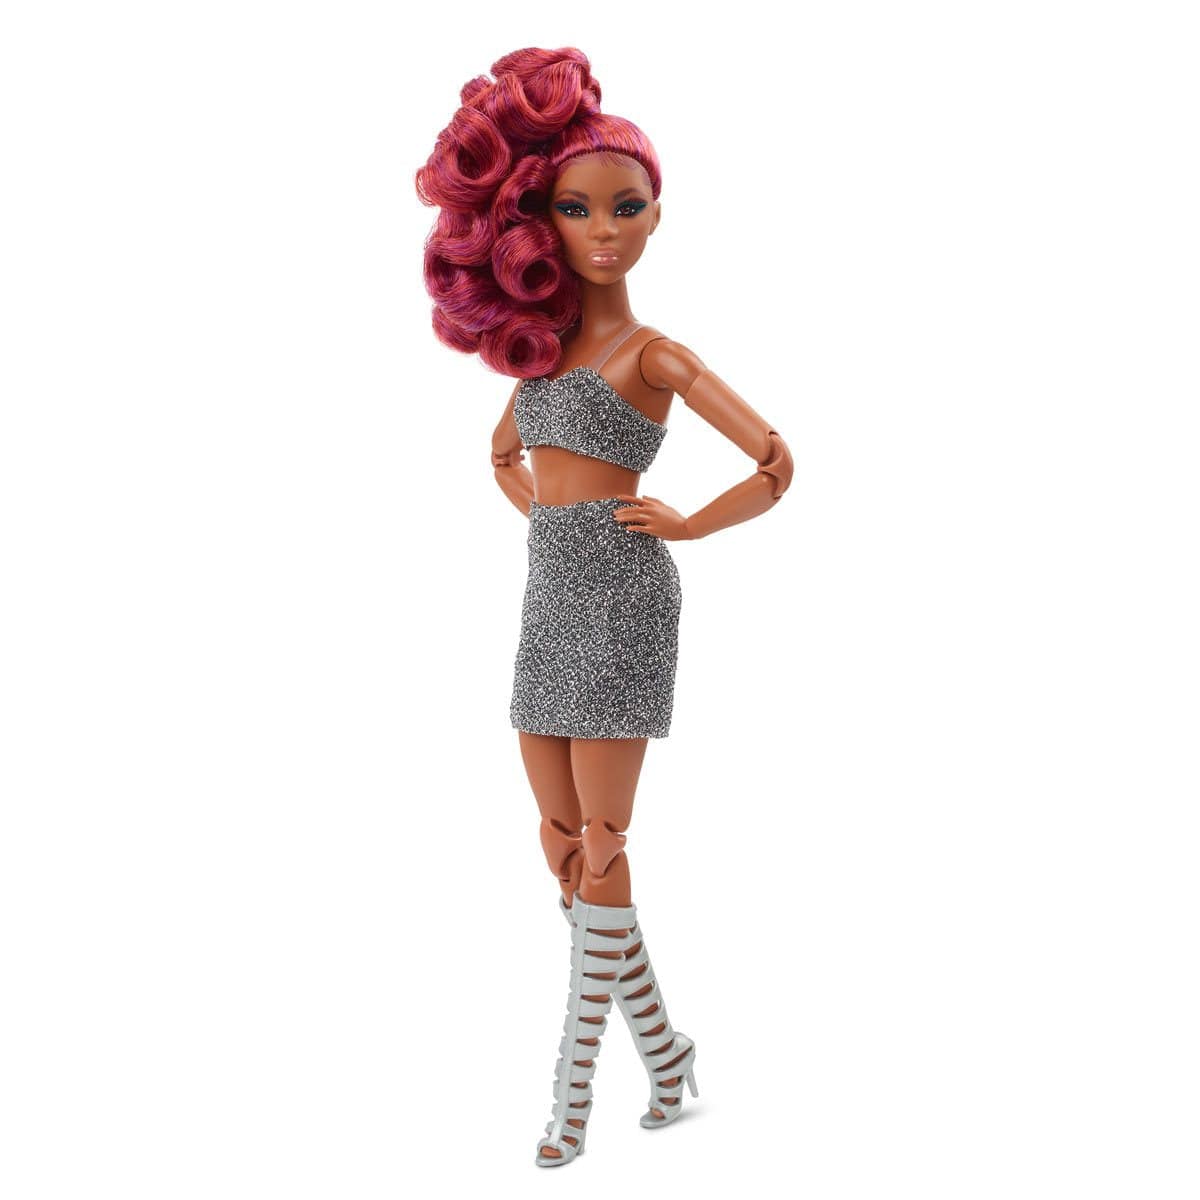 Barbie Looks Doll (Petite, Curly Red Hair)